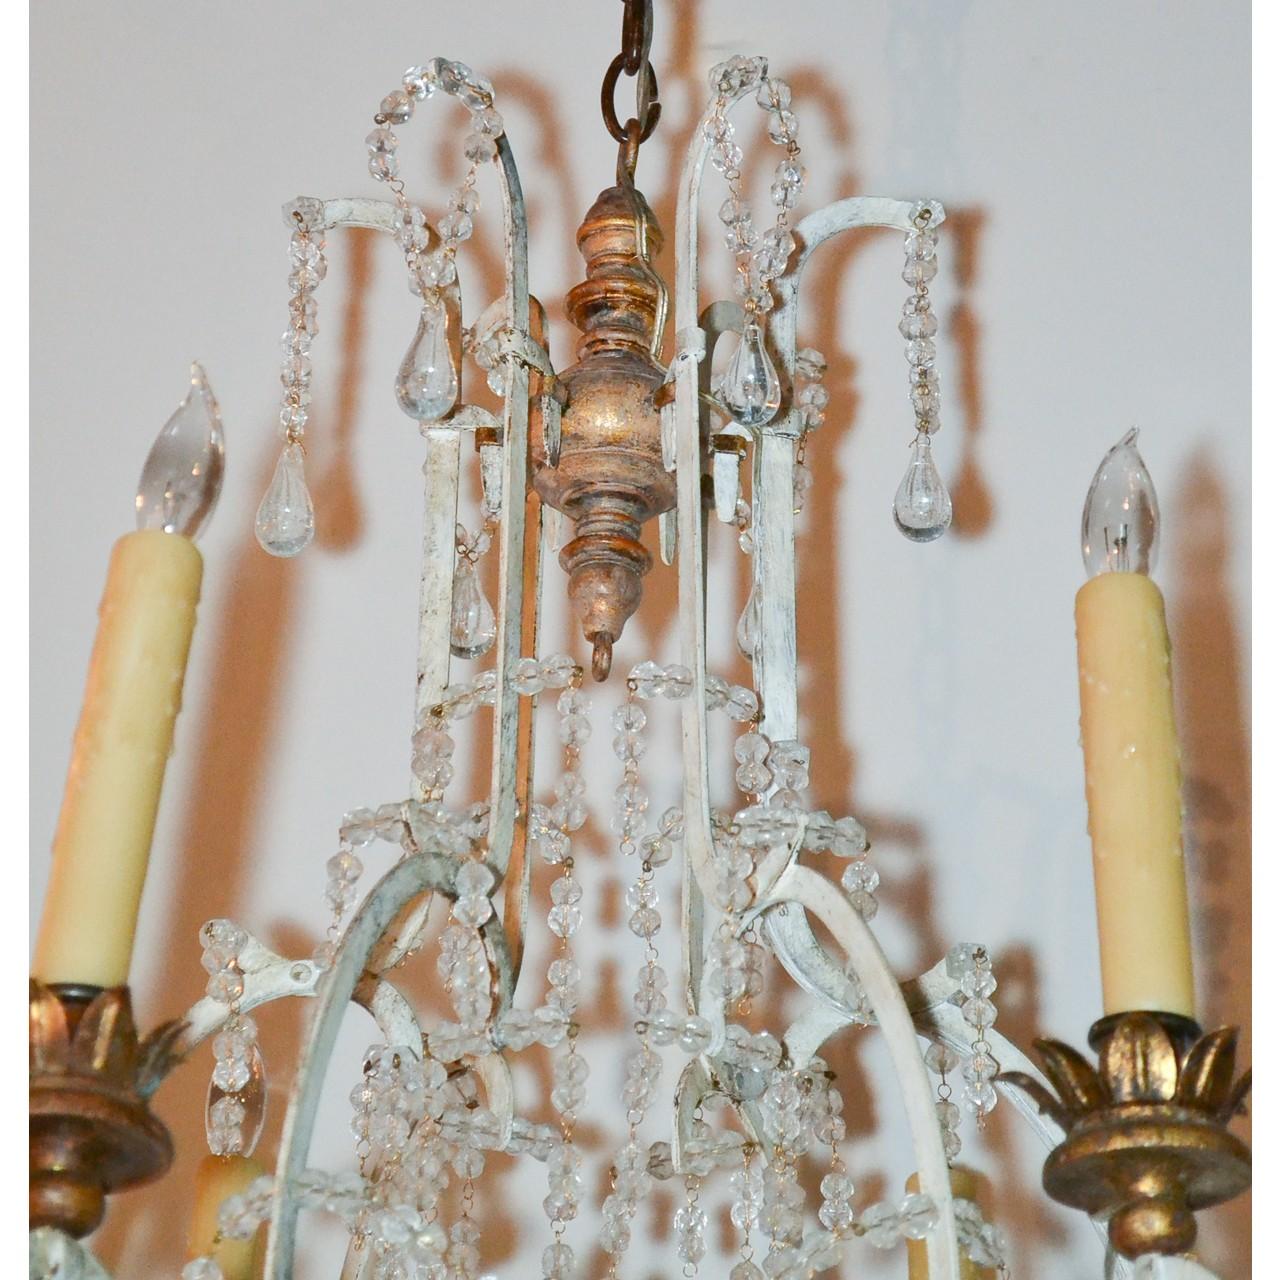 Lovely 19th century French giltwood and iron chandelier decorated overall with crystal beads and accented with crystal tear-drops. The contoured patinated iron arms with leaf-spray candle cups,

circa 1890.